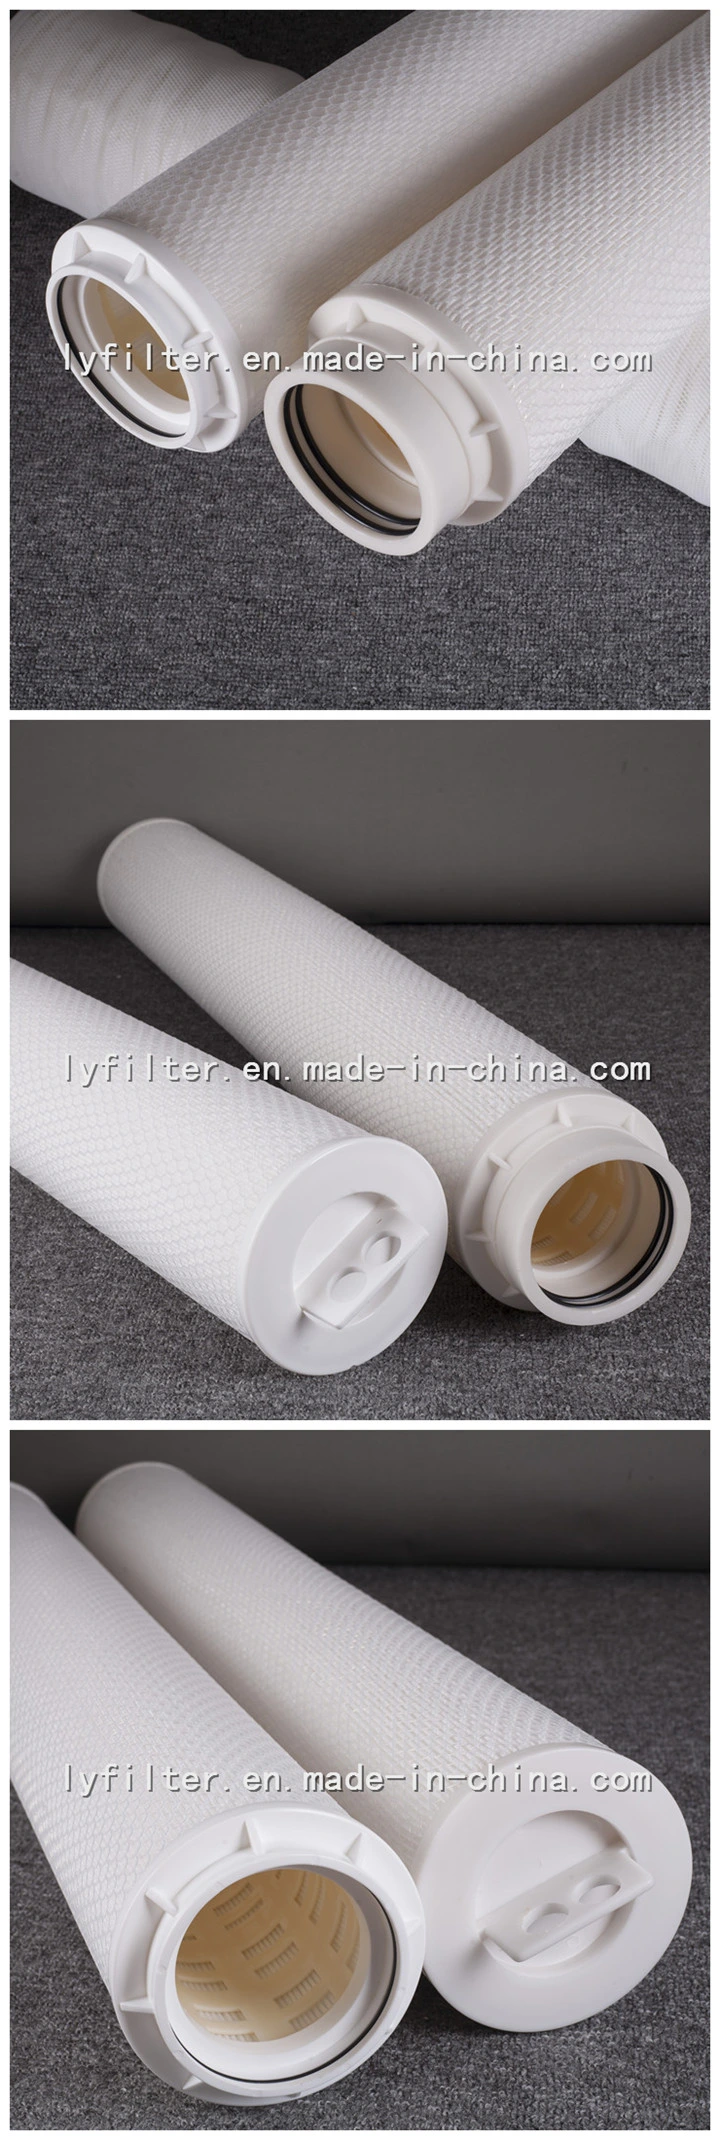 High Flow Rate Pleated Water Filter Cartridge for Multi Cartridges Filter Housing